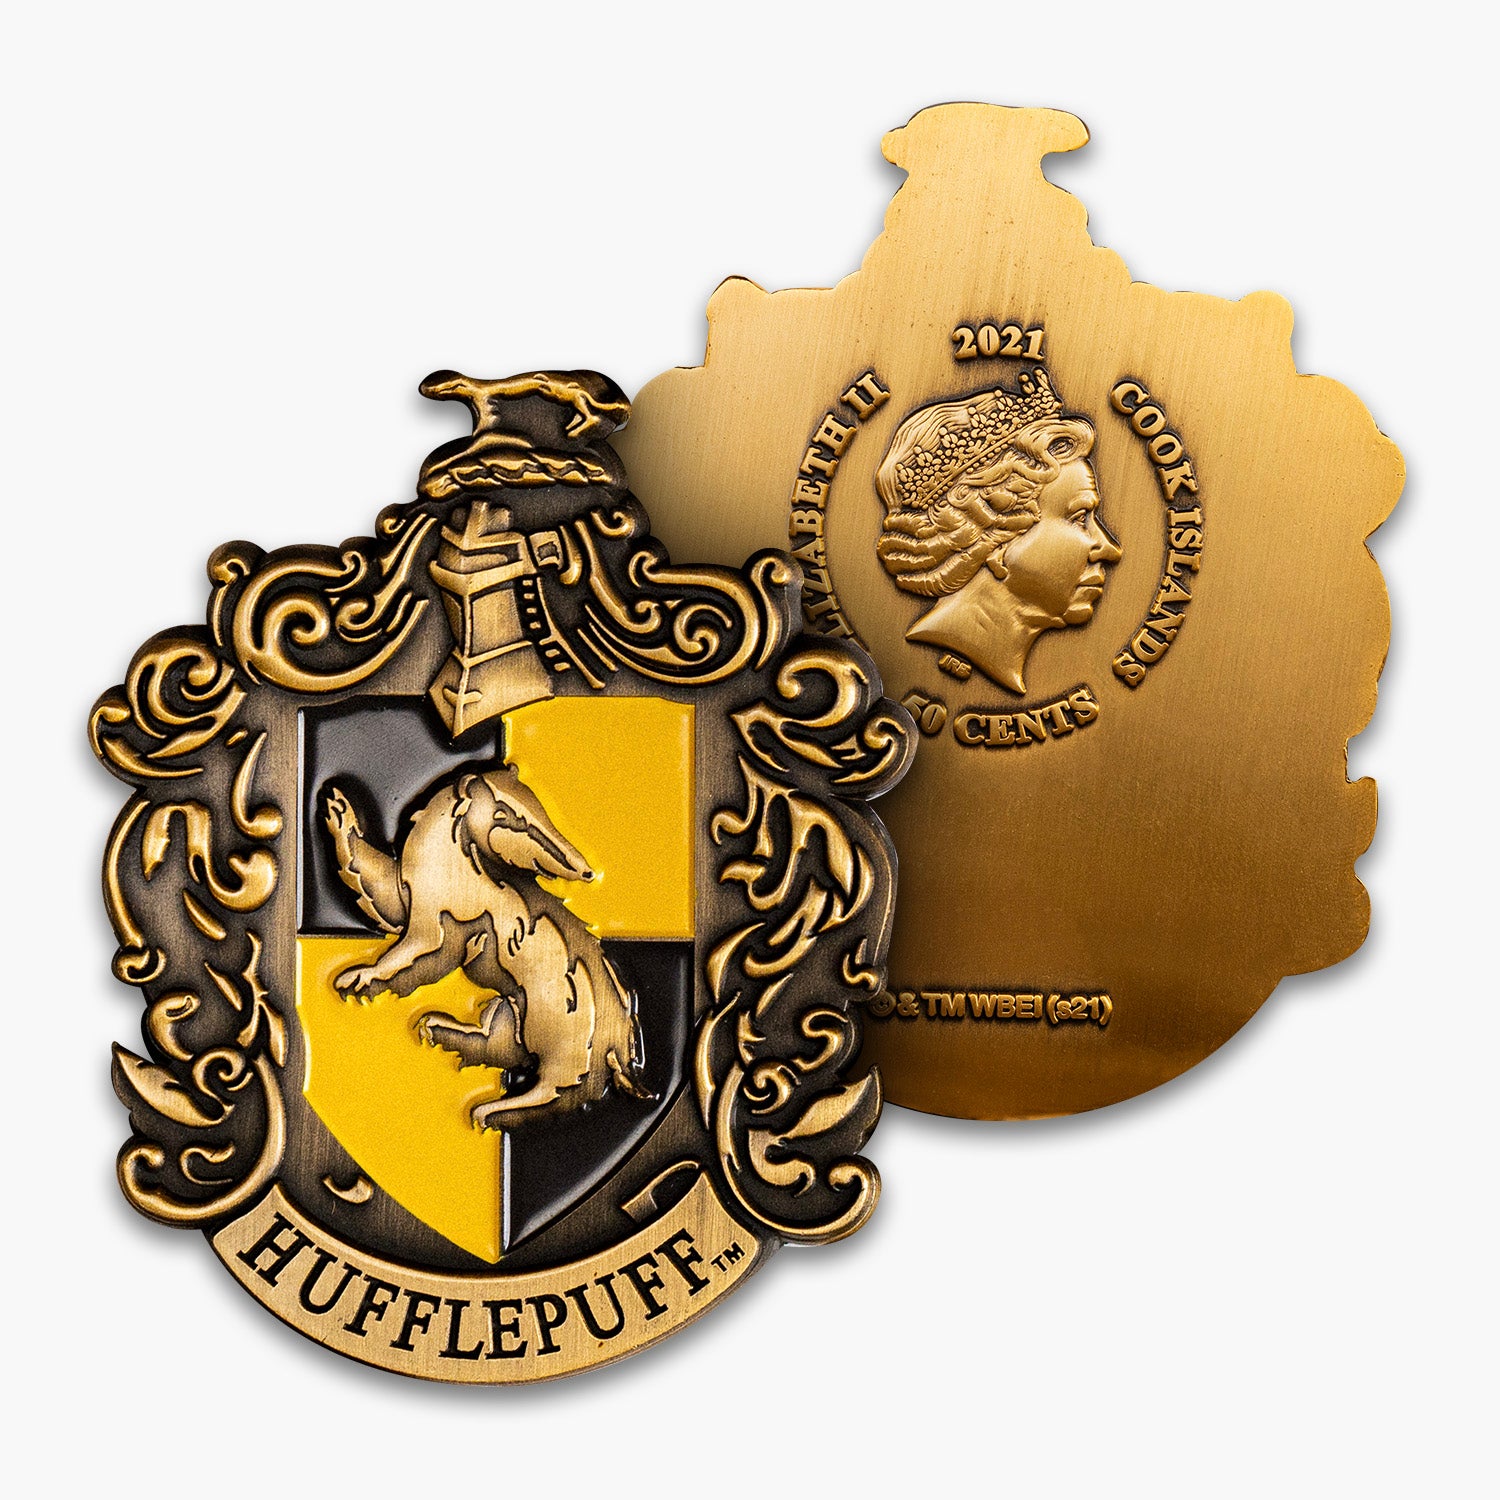 The Official Harry Potter Hufflepuff House Crest Shaped Coin